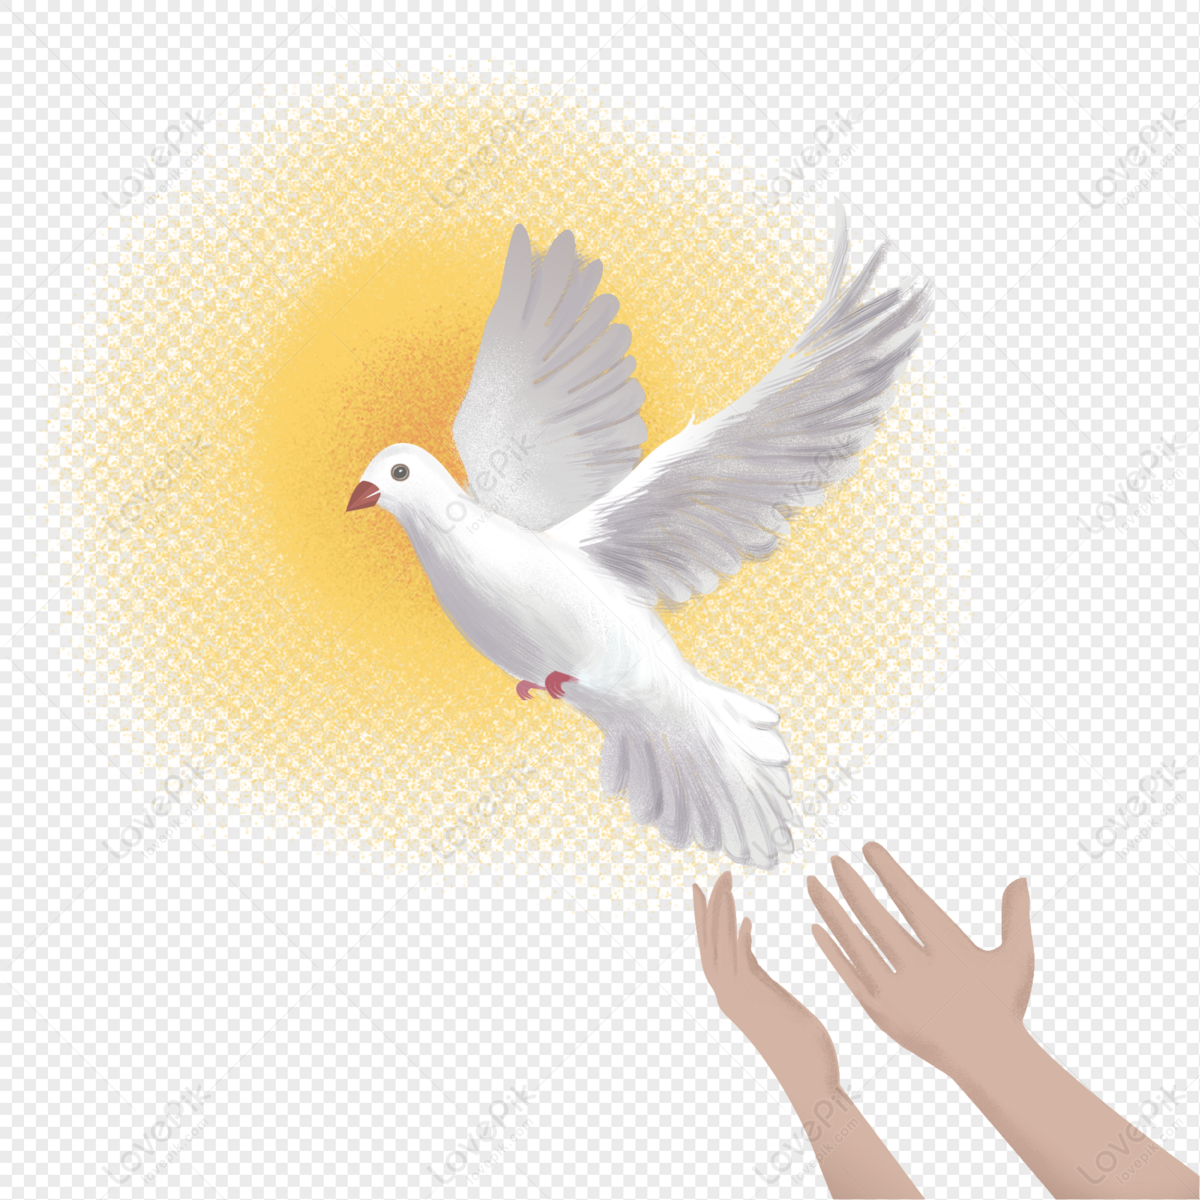 Flying Pigeon PNG Transparent Background And Clipart Image For Free  Download - Lovepik | 401405380